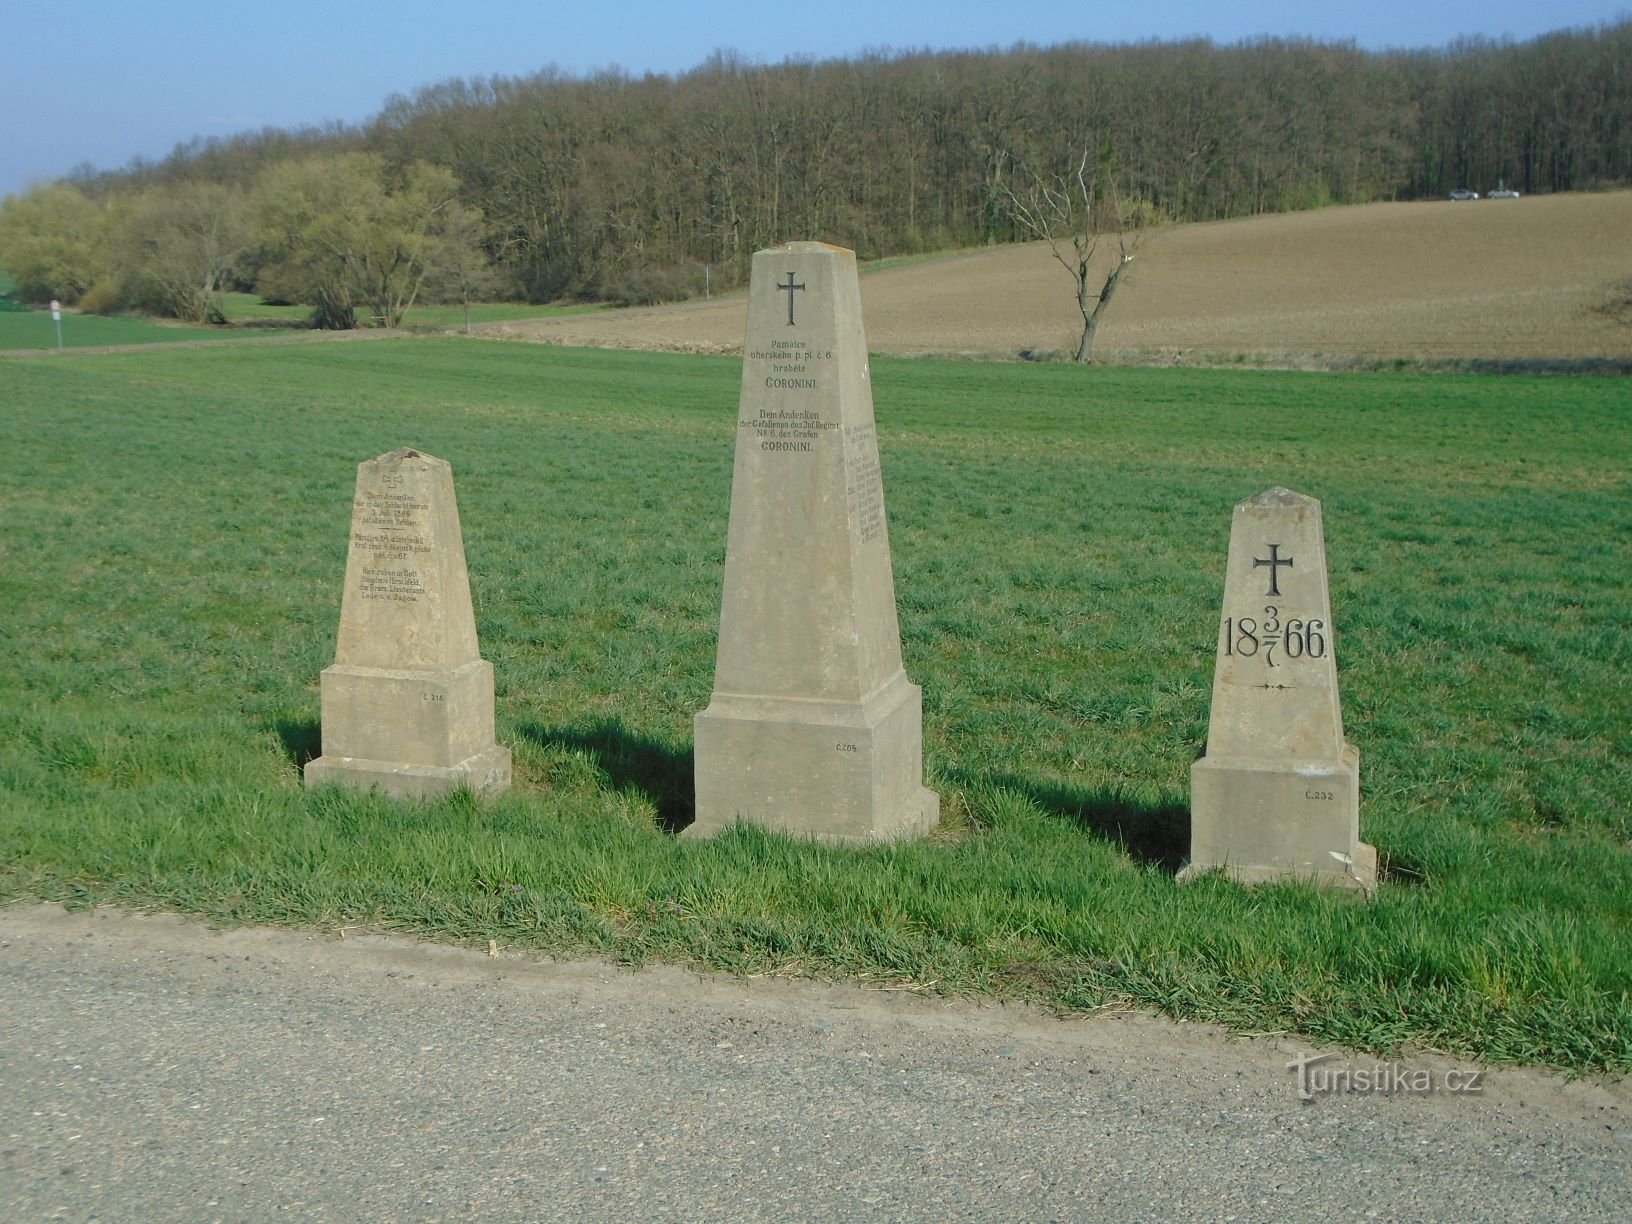 Monuments of the battle from 1866 by the road (Čistěves, 7.4.2019/XNUMX/XNUMX)